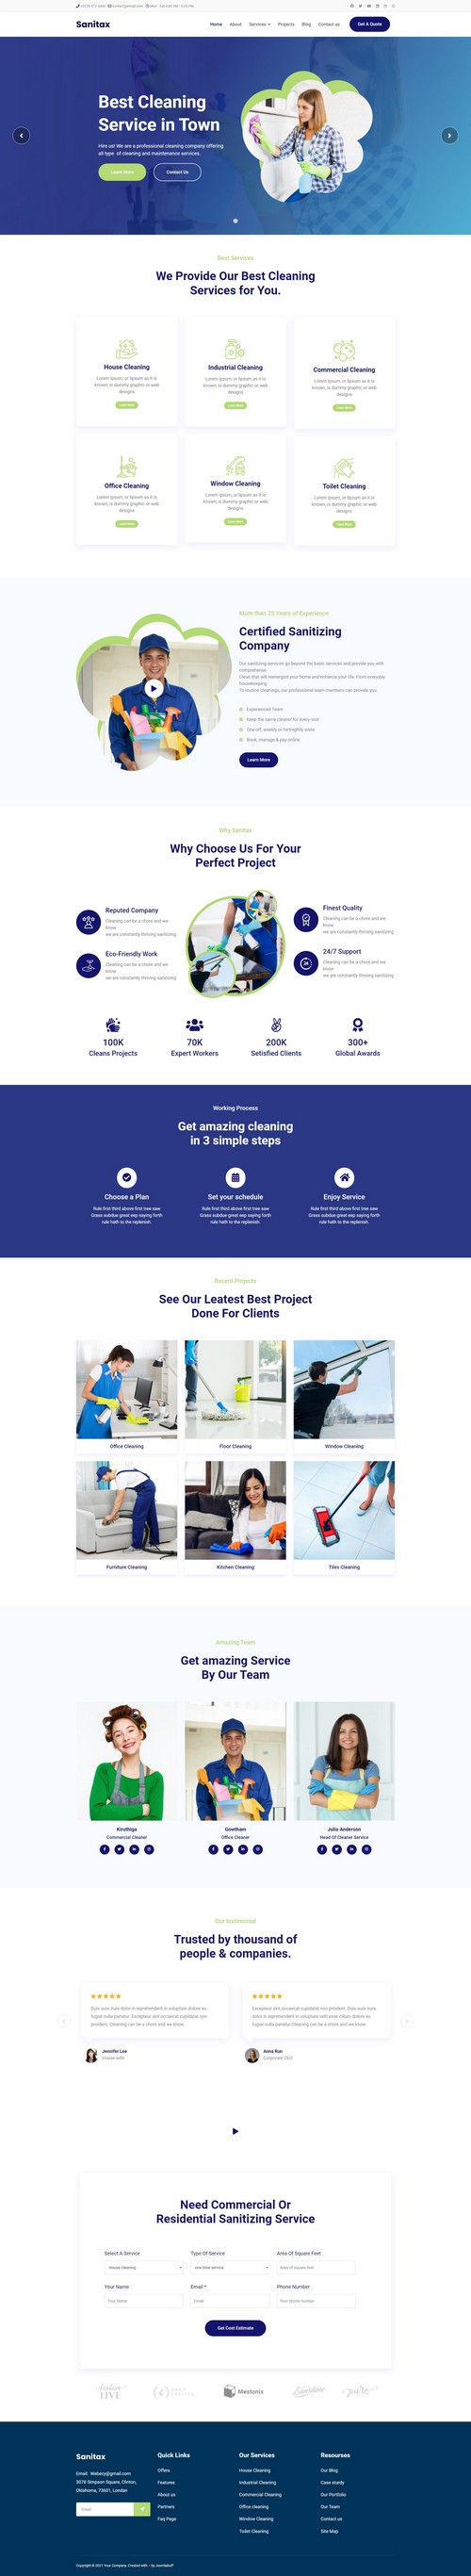 Sanitax - Professional Cleaning Services Joomla 4 Template